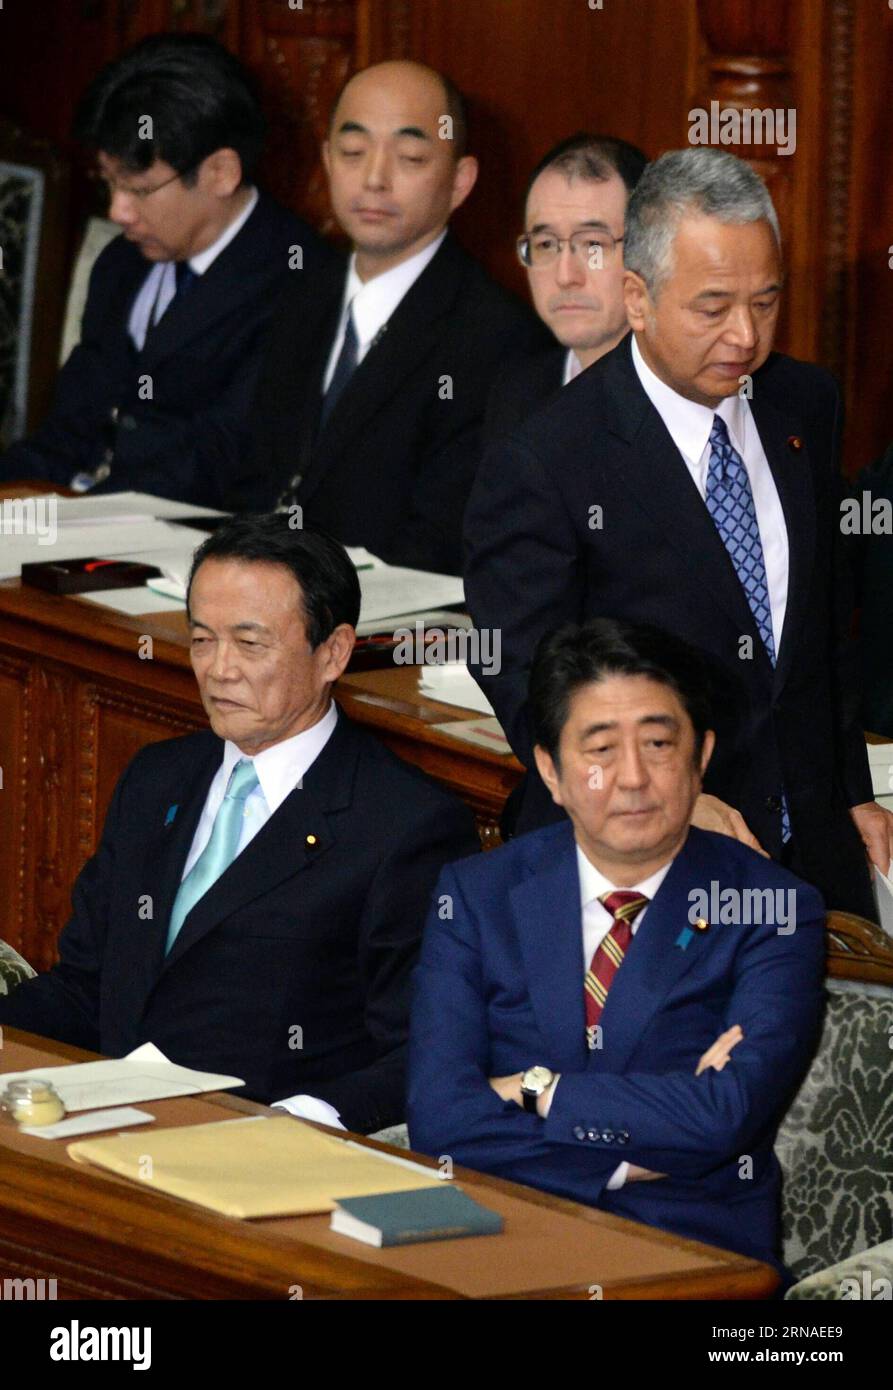 (160122) -- TOKYO, Jan. 22, 2016 -- Japan s Economy and Fiscal Policy Minister Akira Amari (top R) walks behind Prime Minister Shinzo Abe (bottom R) during a session of the House of Representatives in Tokyo, Japan, on Jan. 22, 2016. Japanese Prime Minister Shinzo Abe sought to gain more votes from lower income class for the upcoming upper house election by vowing to address wage gaps in his policy speech on Friday. ) JAPAN-TOKYO-ABE-POLICY SPEECH MaxPing PUBLICATIONxNOTxINxCHN   160122 Tokyo Jan 22 2016 Japan S Economy and Fiscal Policy Ministers Akira Amari Top r Walks behind Prime Ministers Stock Photo